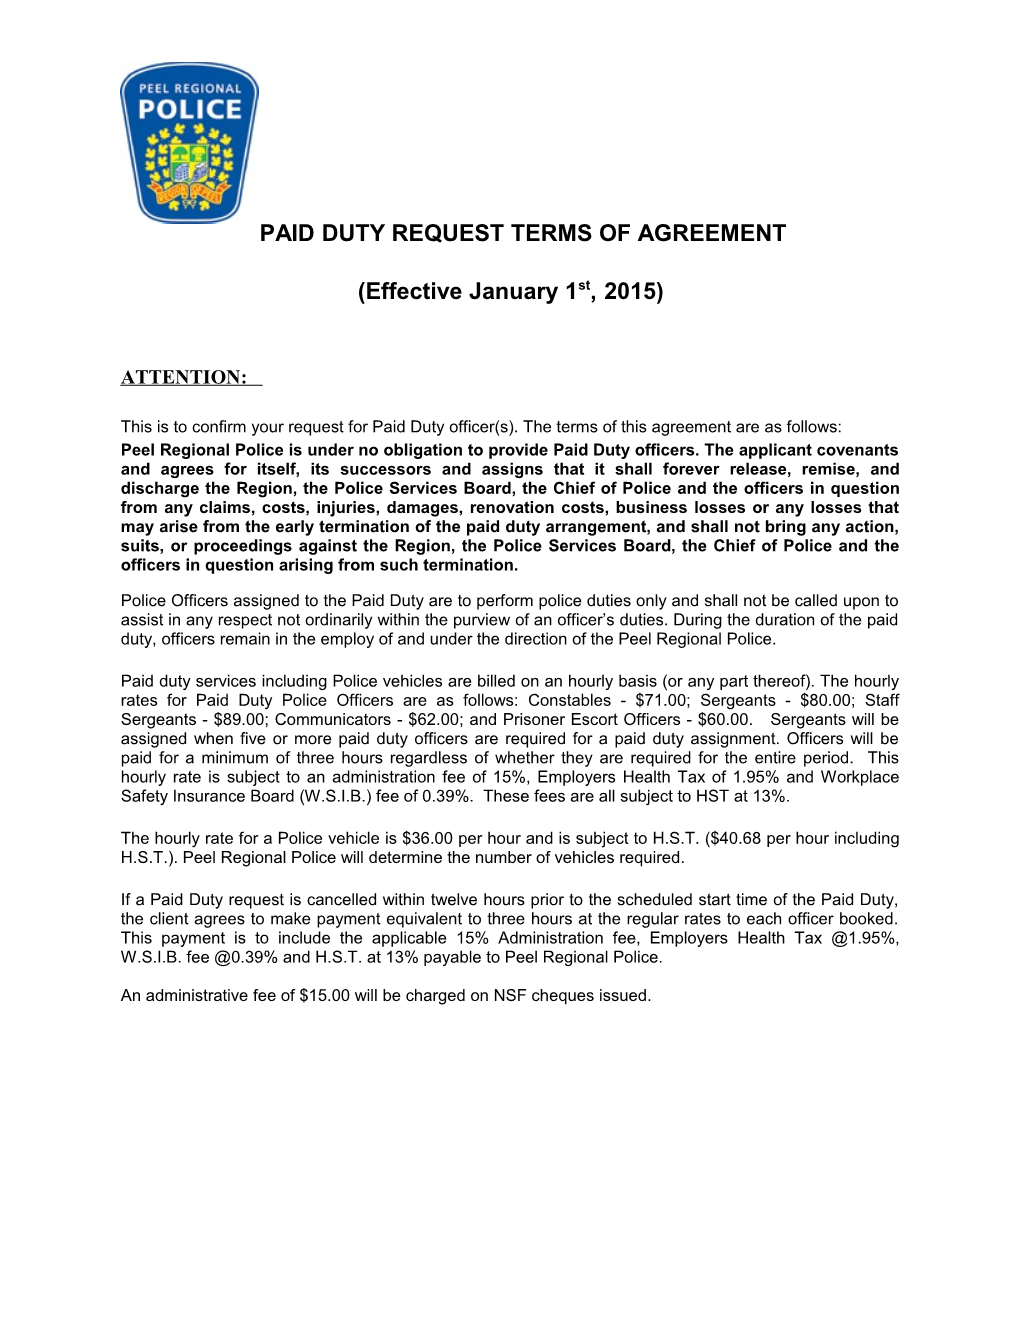 Paid Duty Request Terms of Agreement